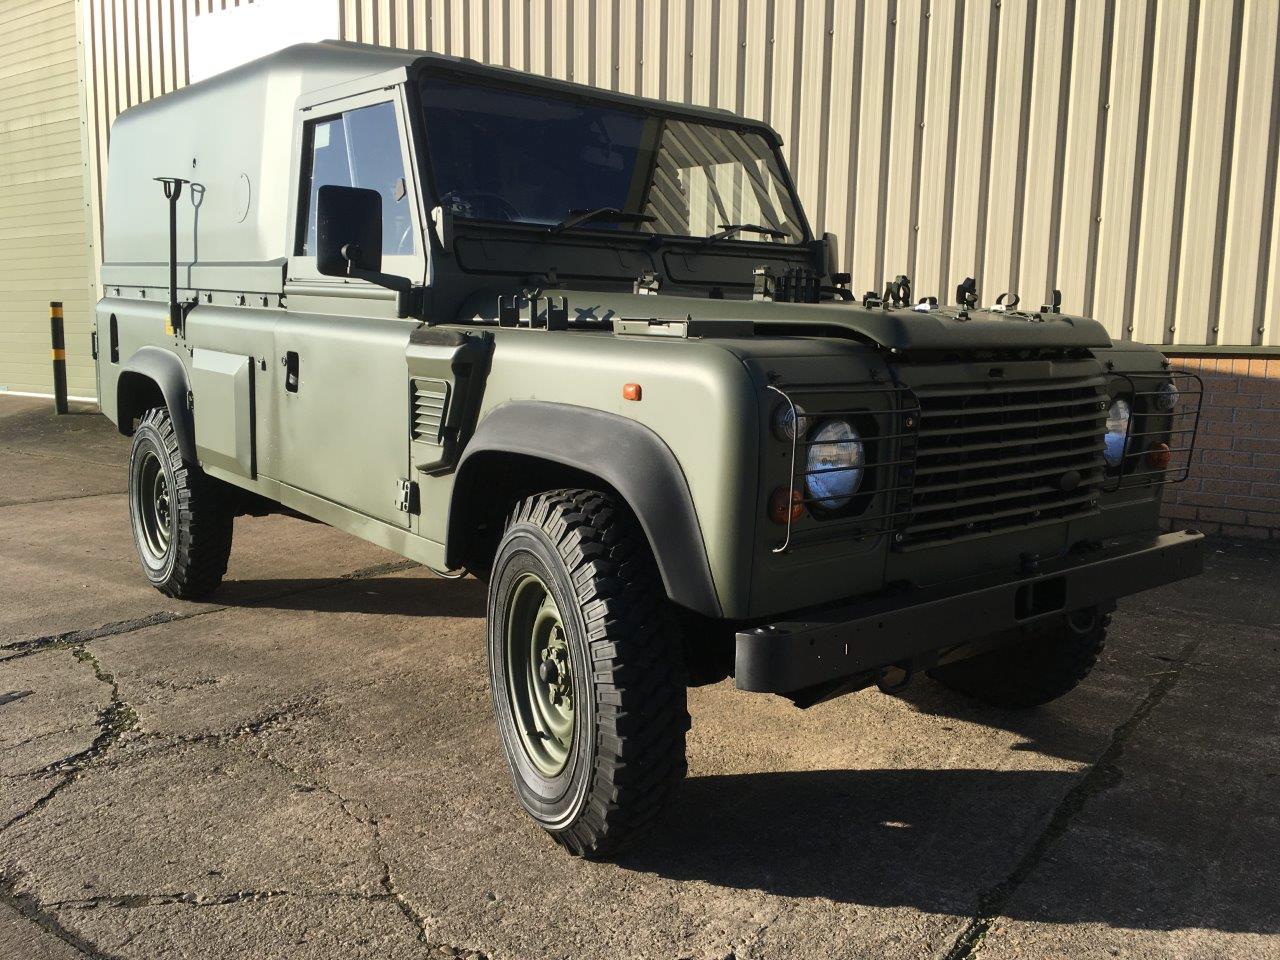 Land Rover Defender 110 Wolf  RHD Hard Top (Remus) - Govsales of ex military vehicles for sale, mod surplus